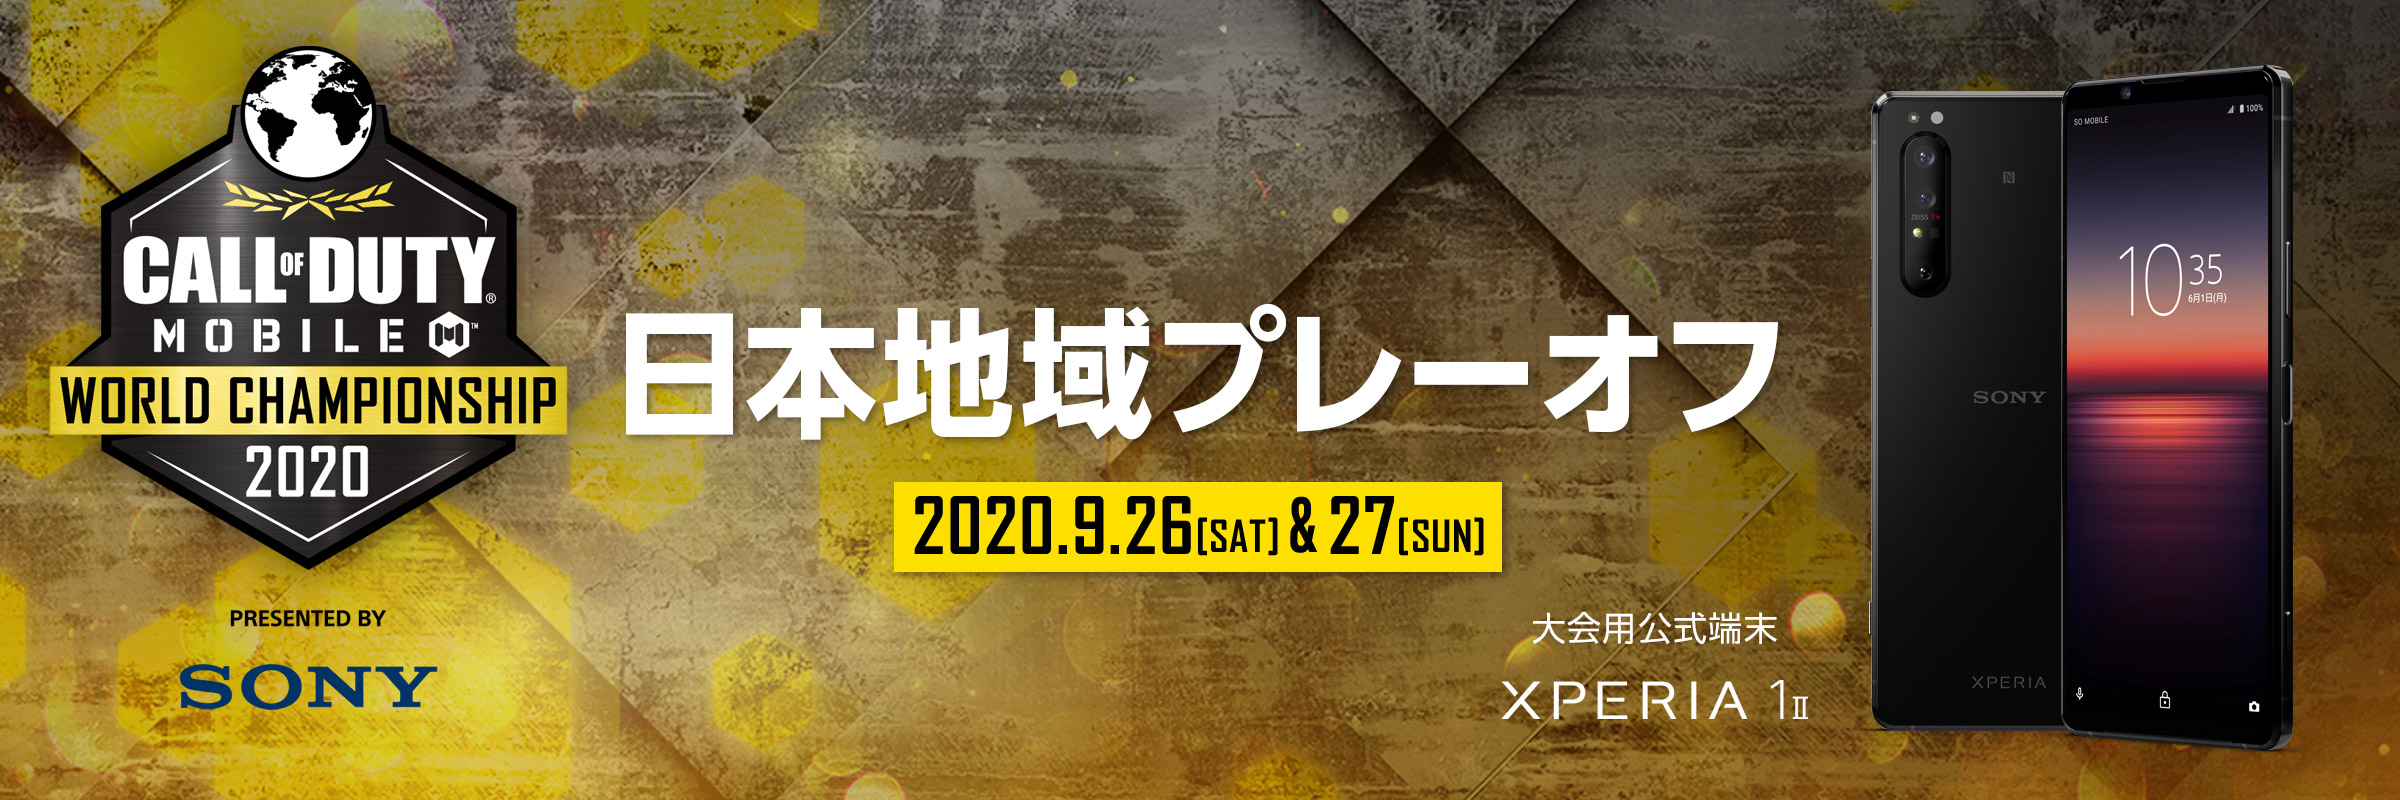 Call of Duty:Mobile ワールドチャンピオンシップ 2020 PRESENTED BY SONY 日本地域プレーオフ 2020.9.26[SAT]/27[SUN]　大会用公式端末：Xperia 1 II